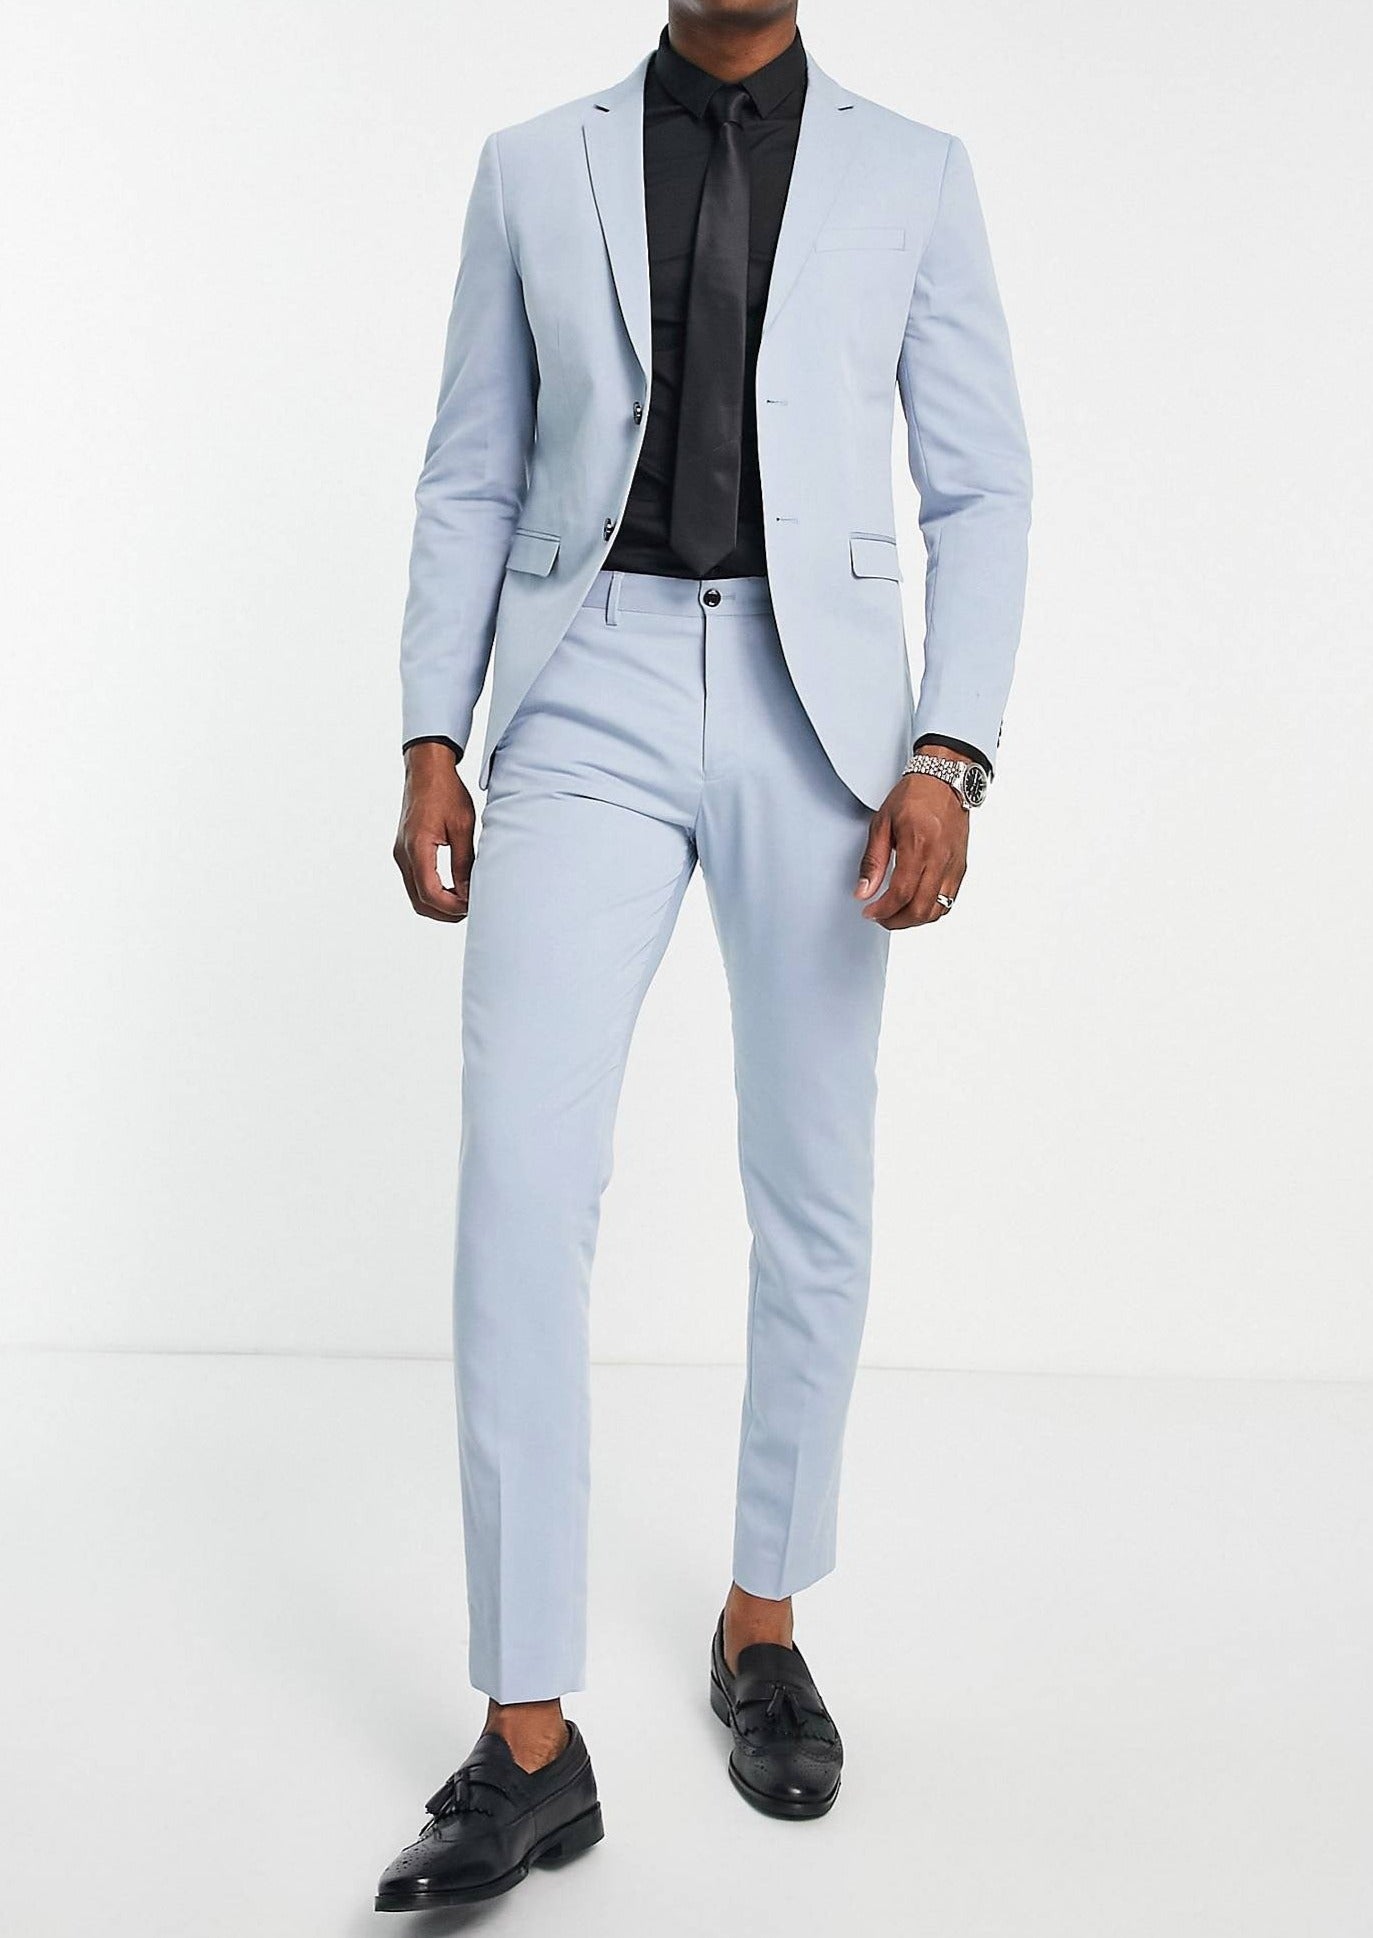 Navy Blue Blazer with White Pants Part 2  Tailor  Barber